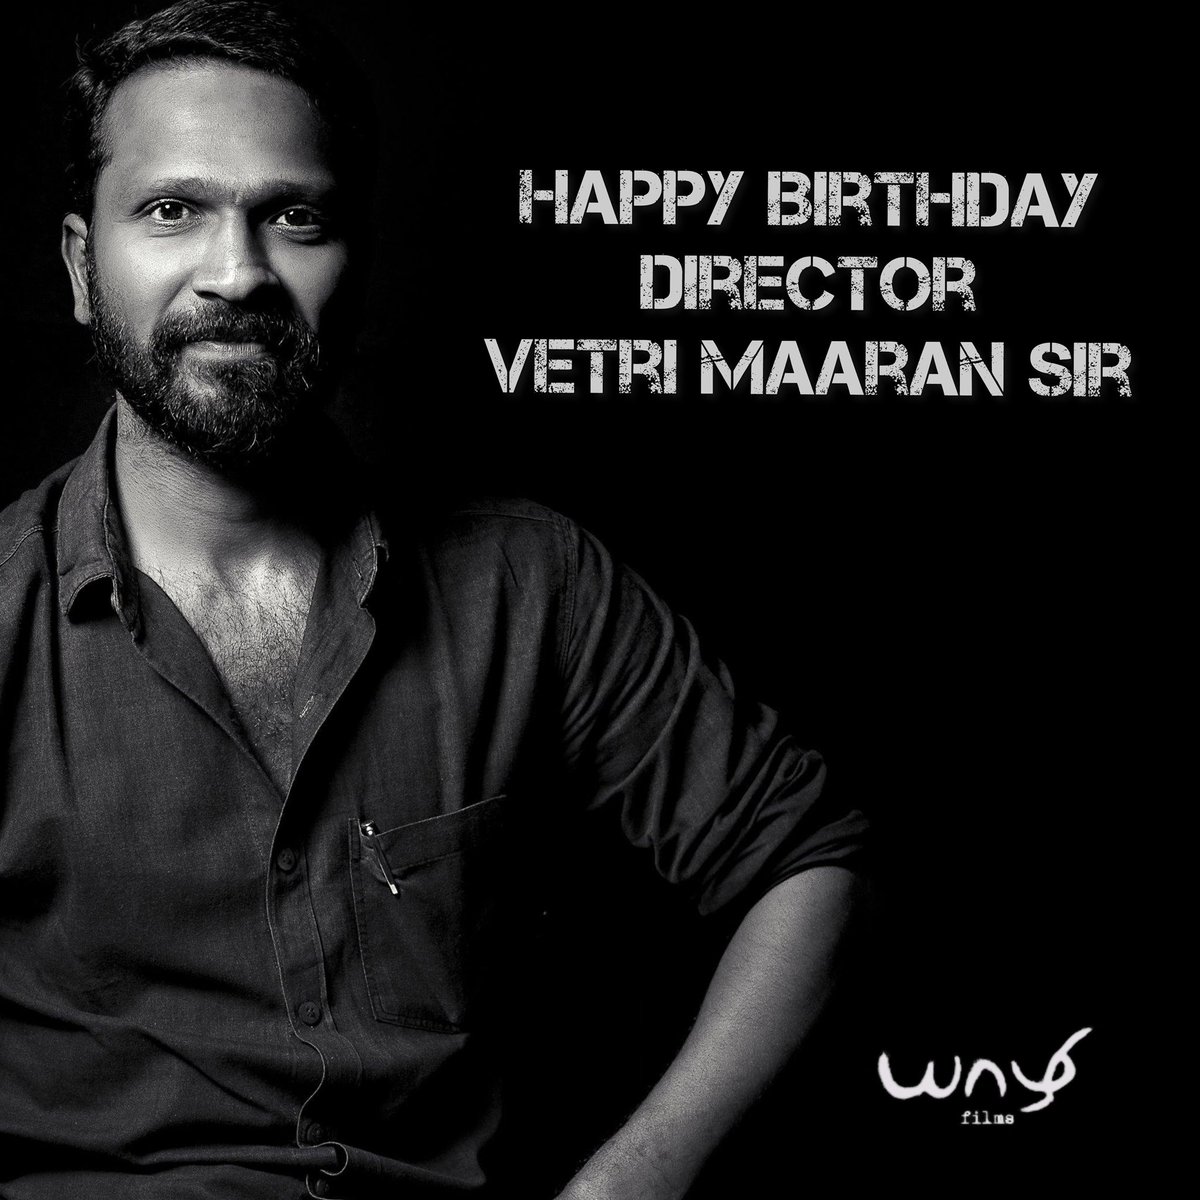 🎉 Happy Birthday to the visionary director Vetri Maaran sir 🎂 Your cinematic brilliance has left an indelible mark. Here's to more incredible films ahead! 🎥 #yaazhifilms #VetriMaaran #HappyBirthdayVetrimaaran